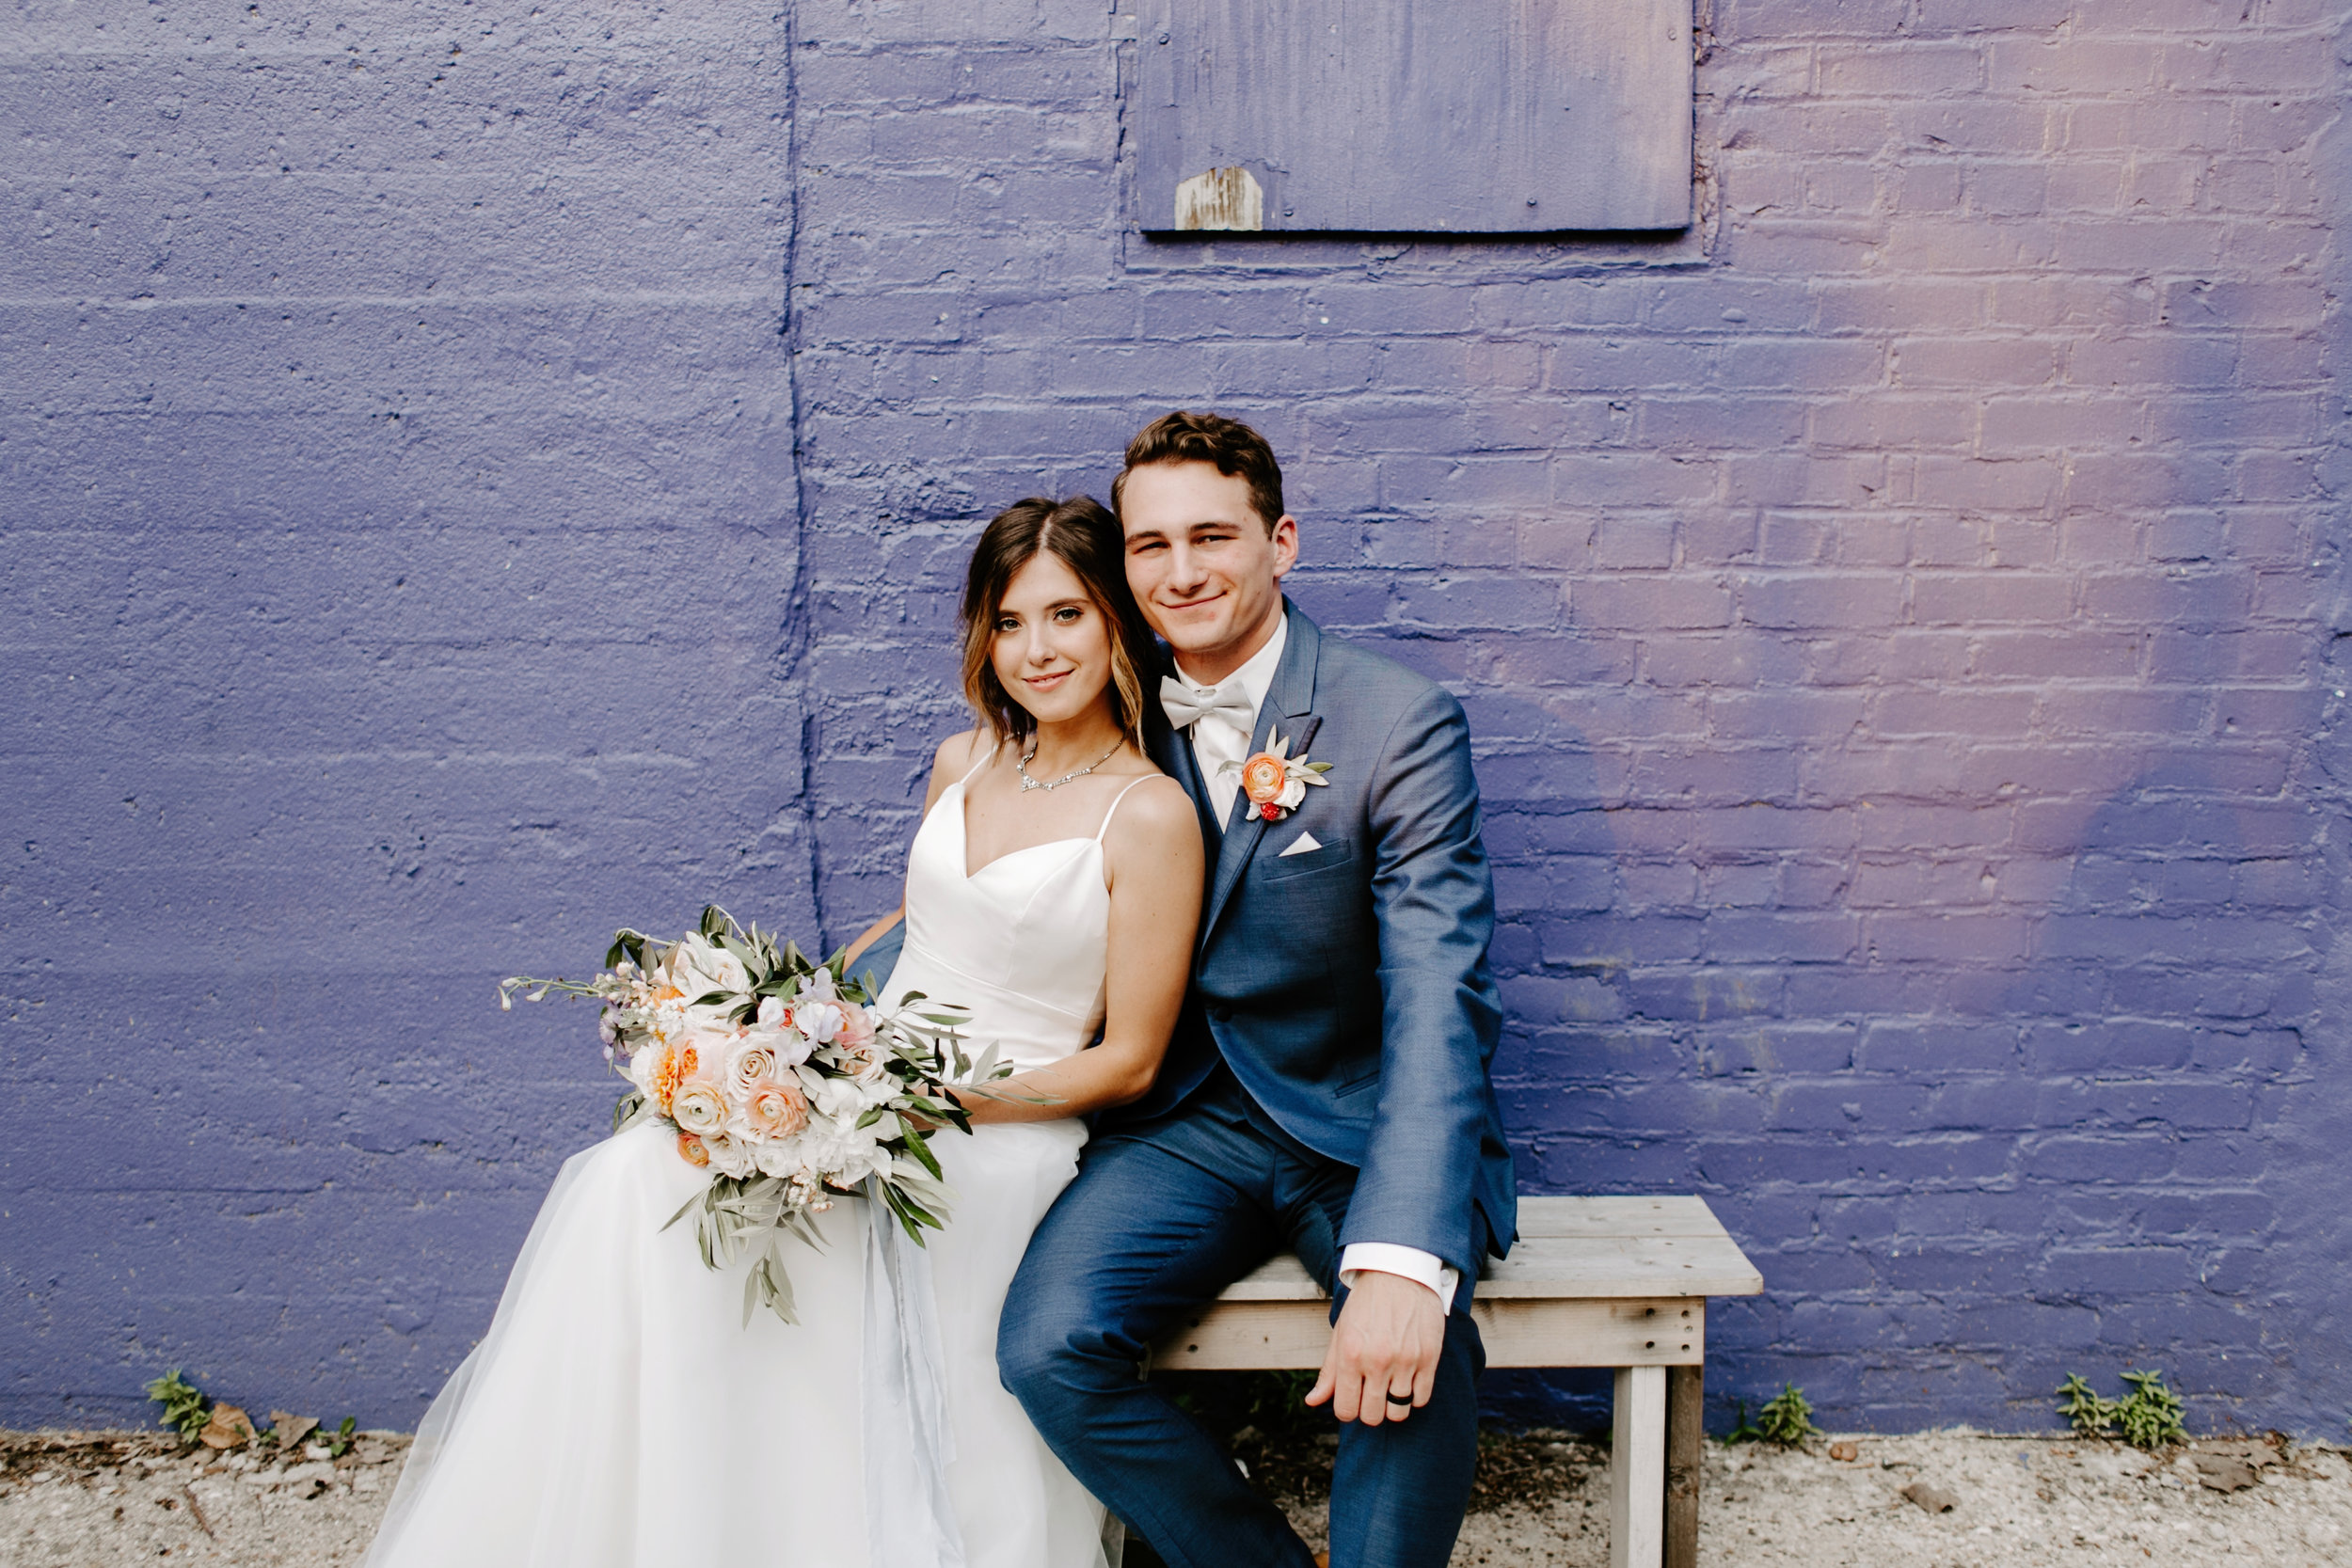 Claire and James Indianapolis Wedding The Tube Factory Emily Elyse Wehner Photography LLC-576.jpg